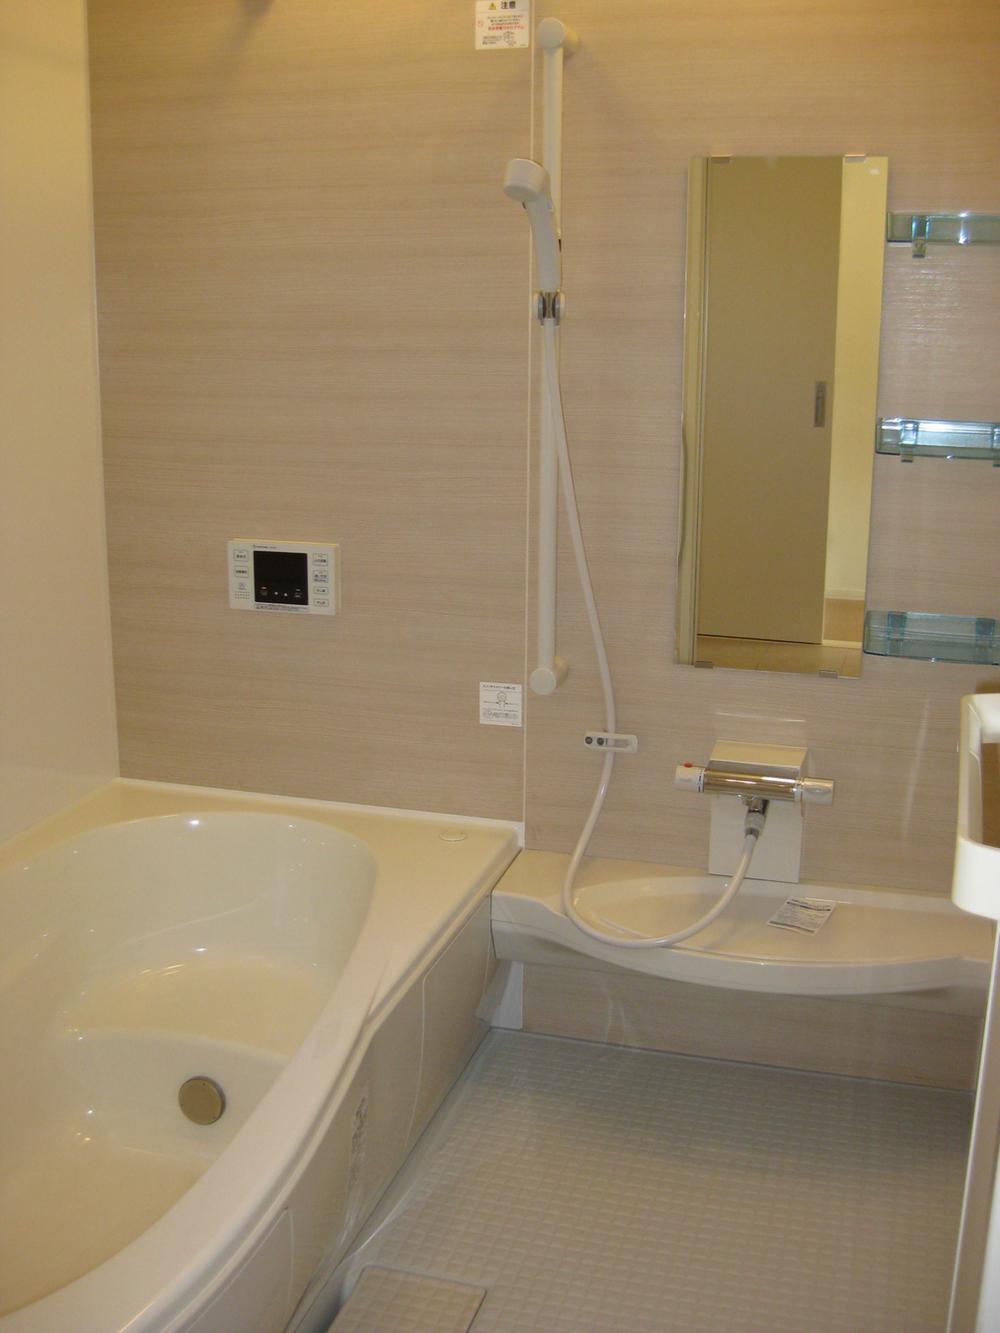 Other Equipment. Since it is a bathroom dryer with in the unit bus, Warm bath can be enjoyed in the warm-up operation. 